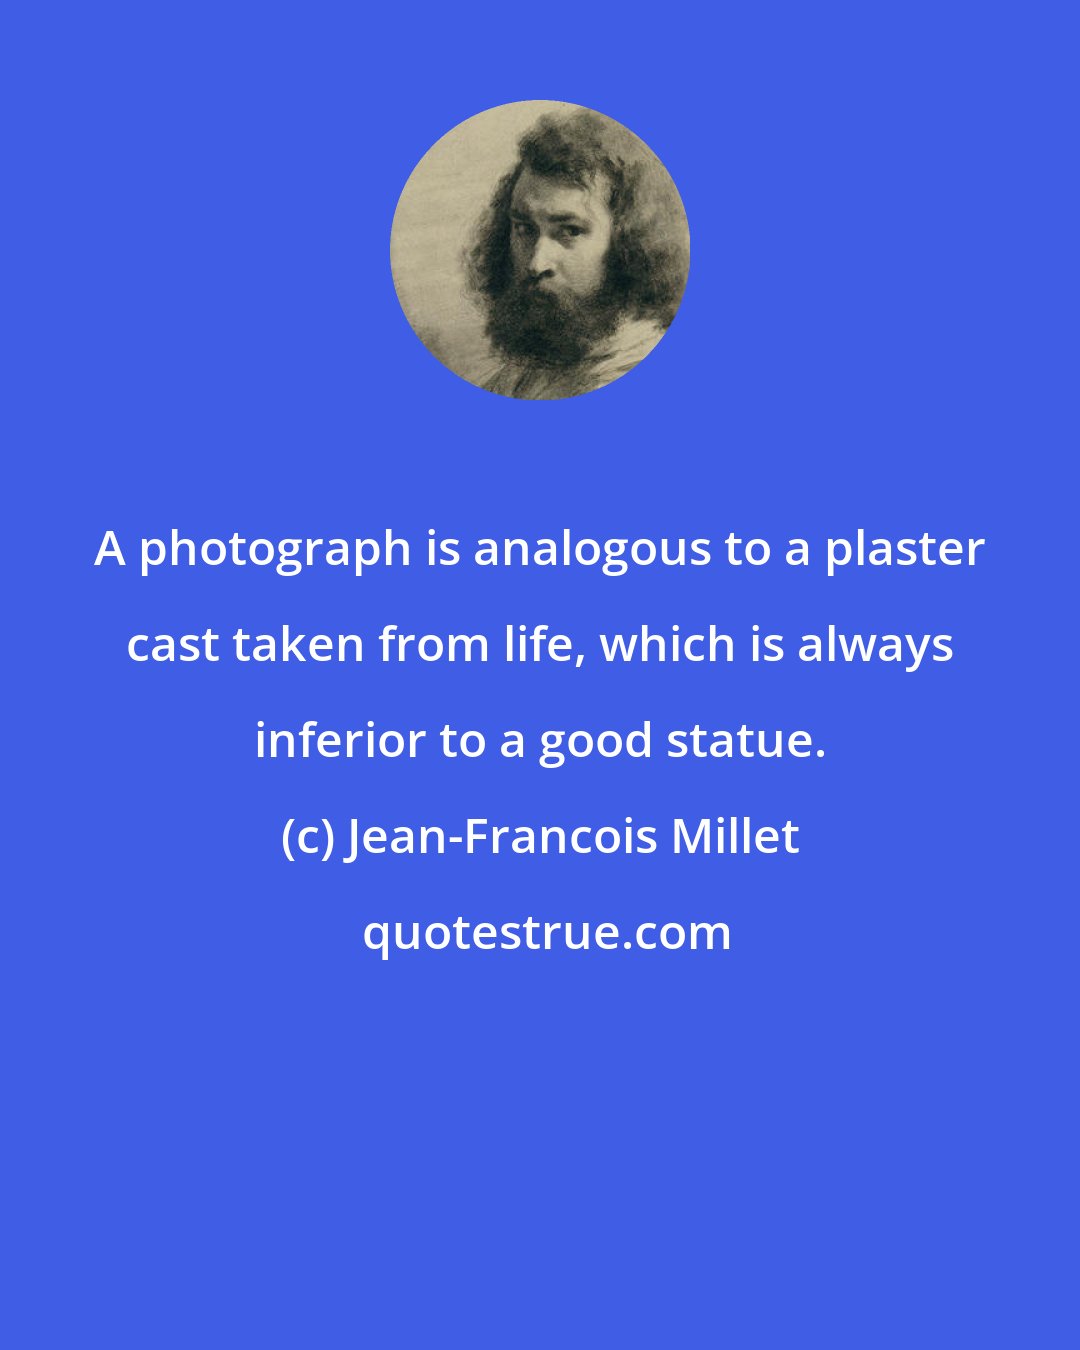 Jean-Francois Millet: A photograph is analogous to a plaster cast taken from life, which is always inferior to a good statue.